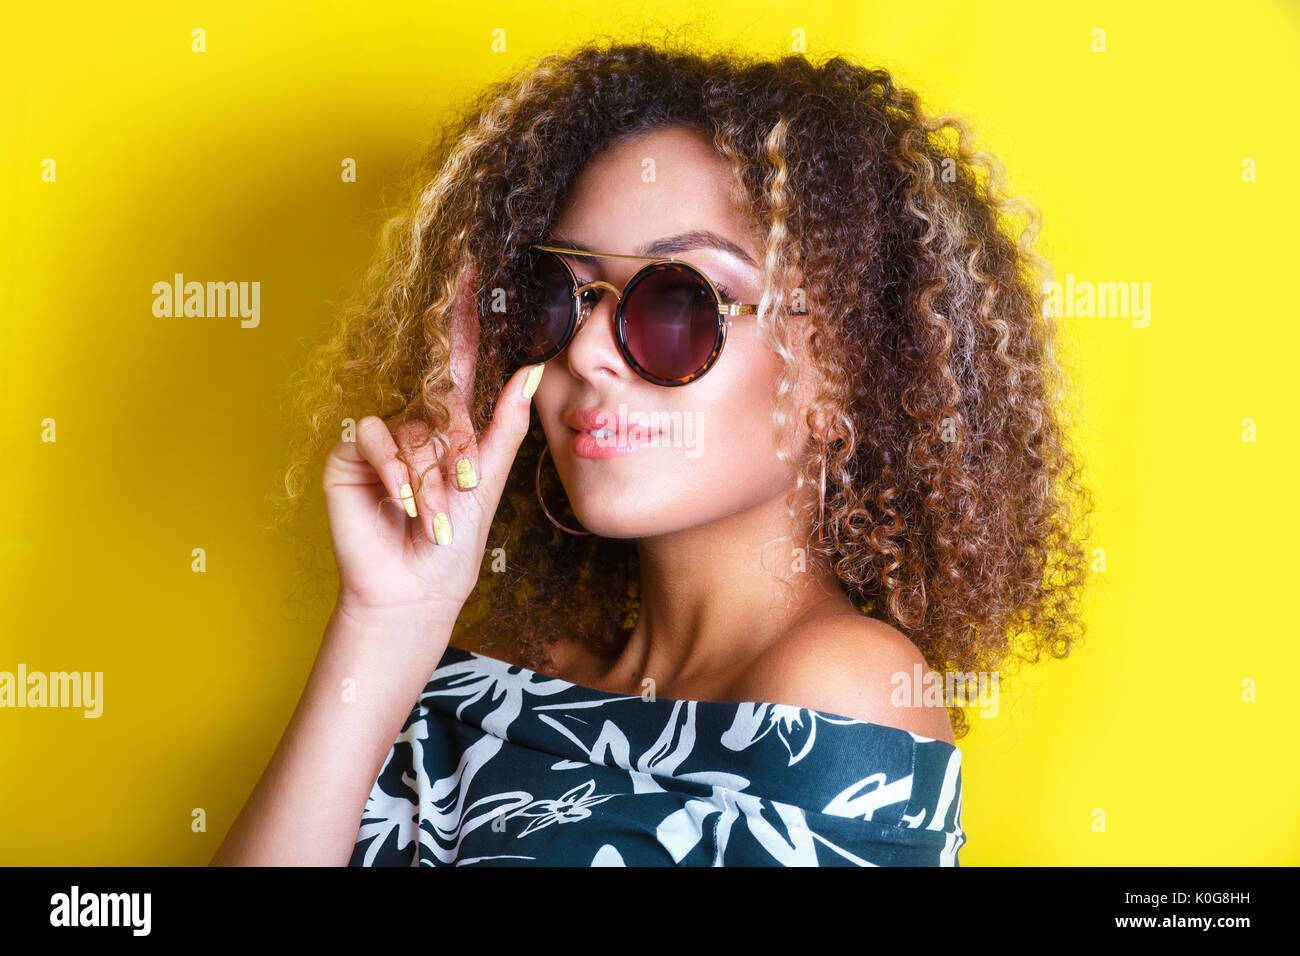 portrait indoors of a young afro american woman in sunglasses. Yellow background. Lifestyle. Stock Photo